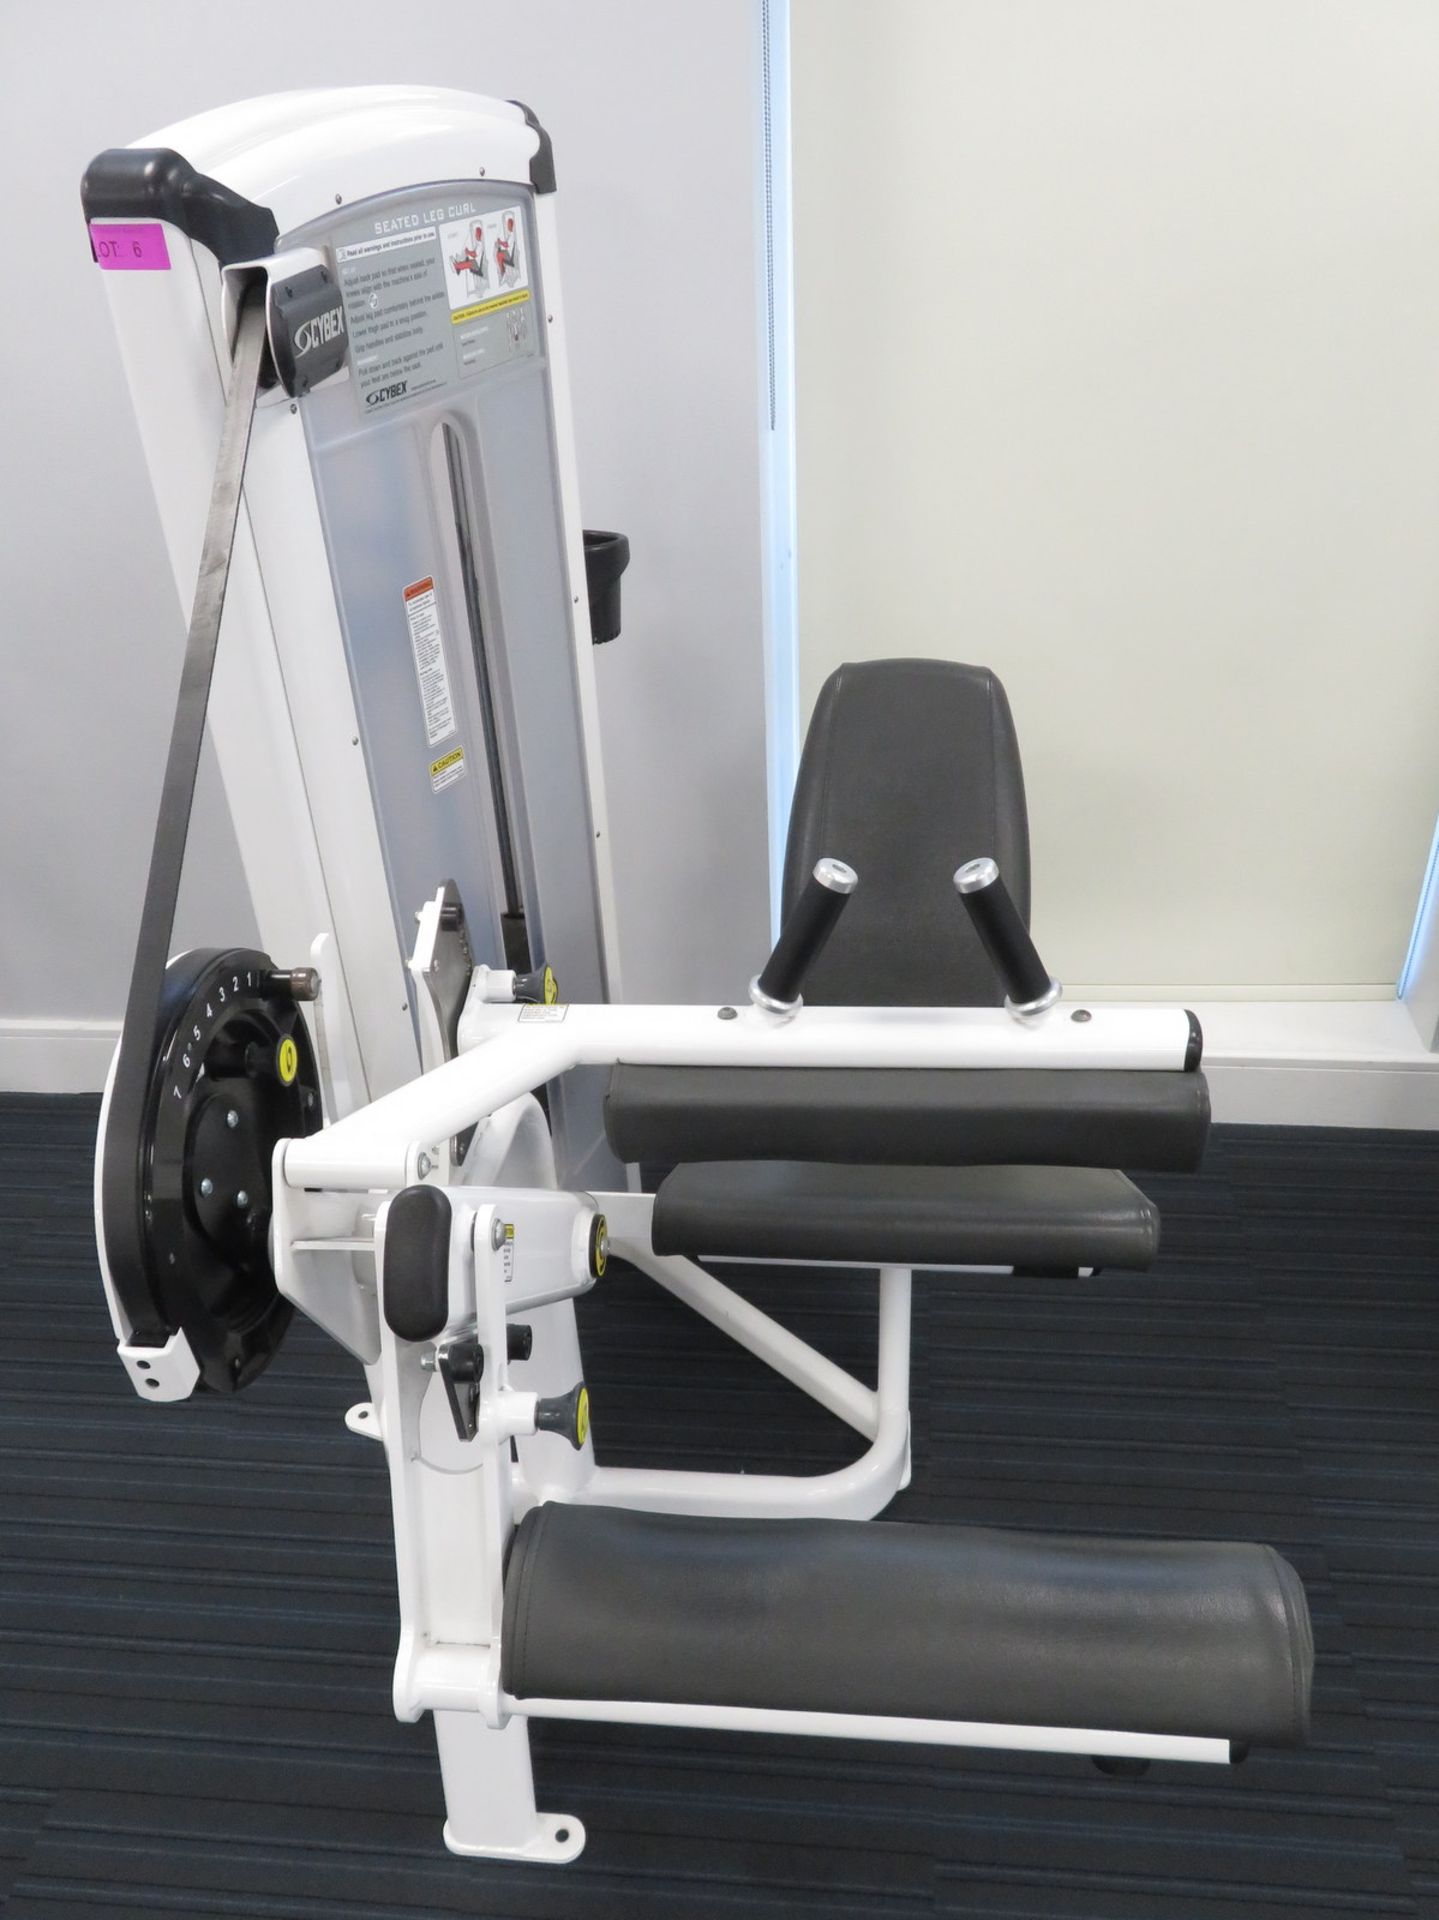 Cybex Seated Leg Curl Model: 12061. 67.5kg Weight Stack. Dimensions: 110x155x160cm (LxDxH - Image 2 of 12